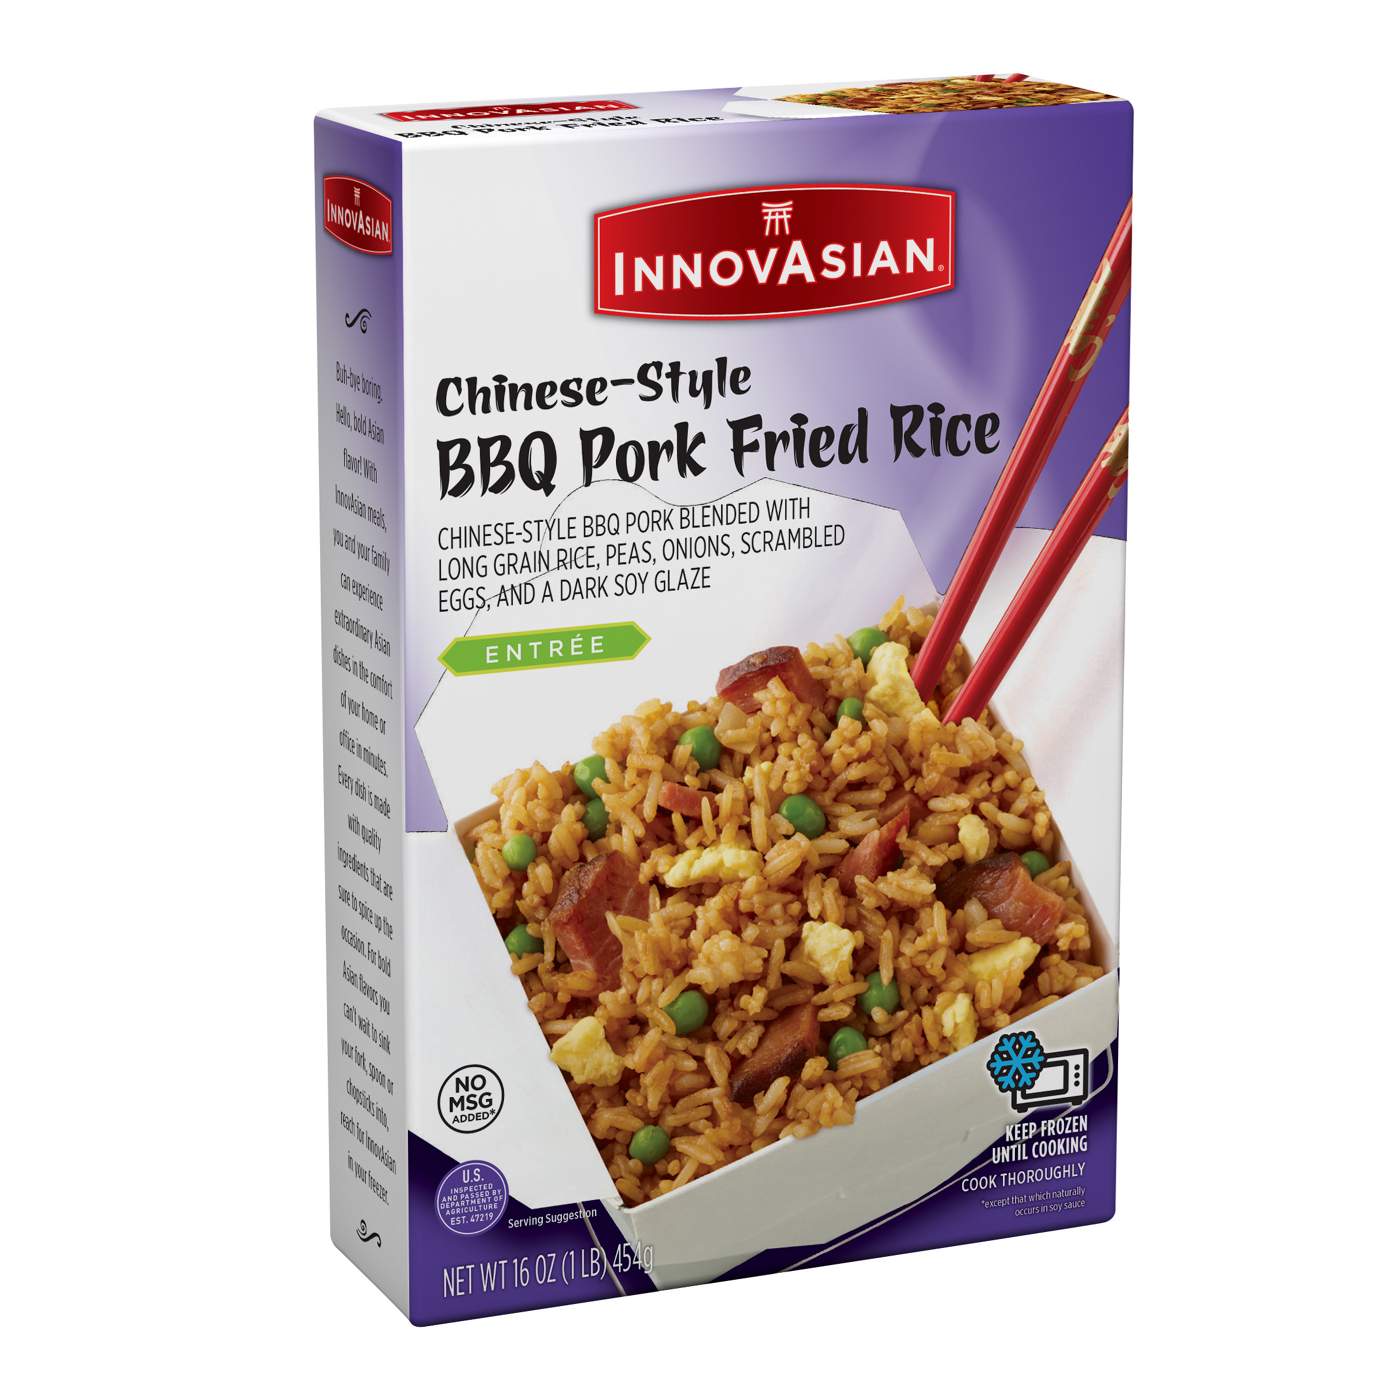 InnovAsian Frozen Chinese-Style BBQ Pork Fried Rice; image 6 of 11